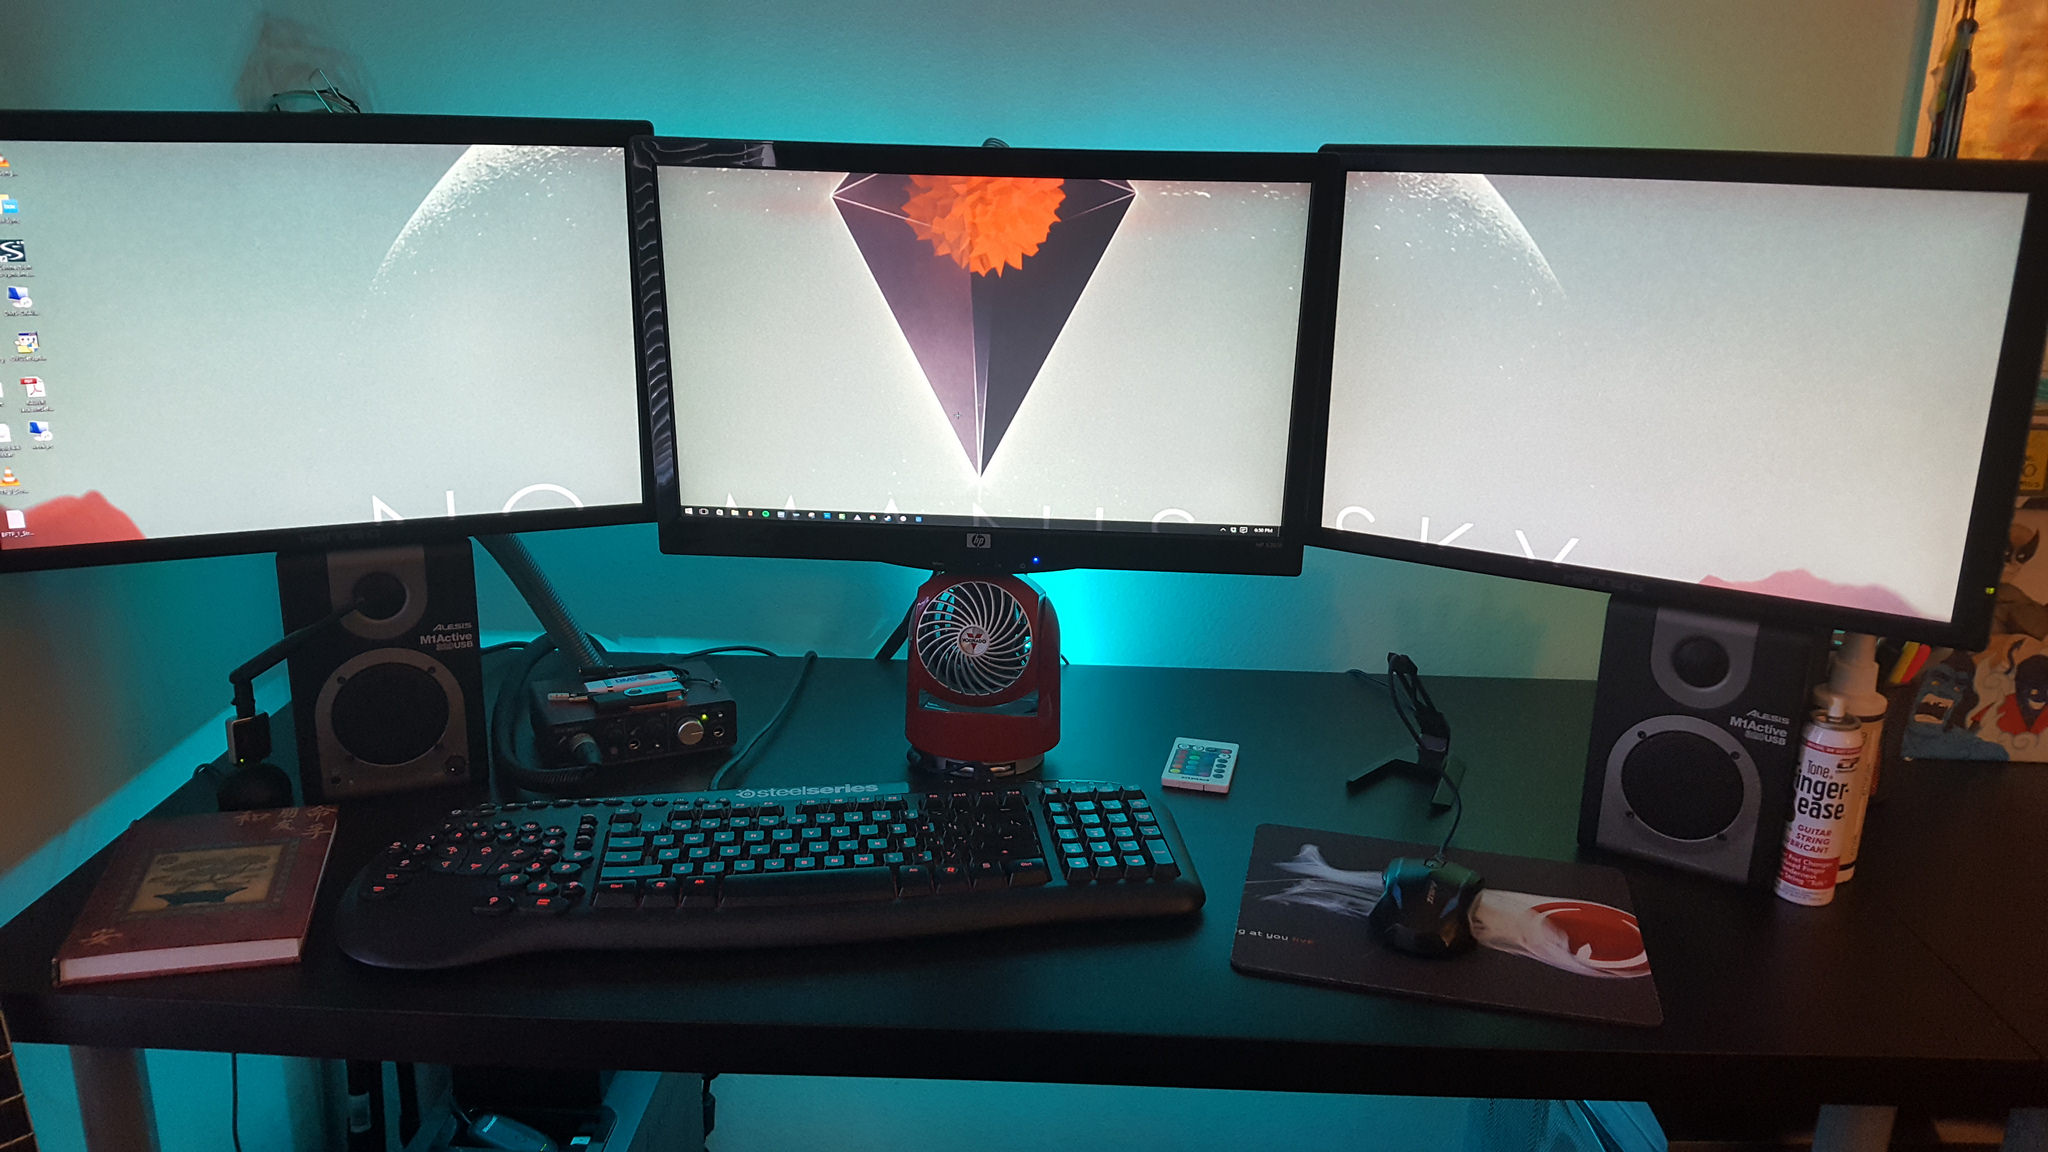 The No Man’s Sky Triple Monitor Workspace